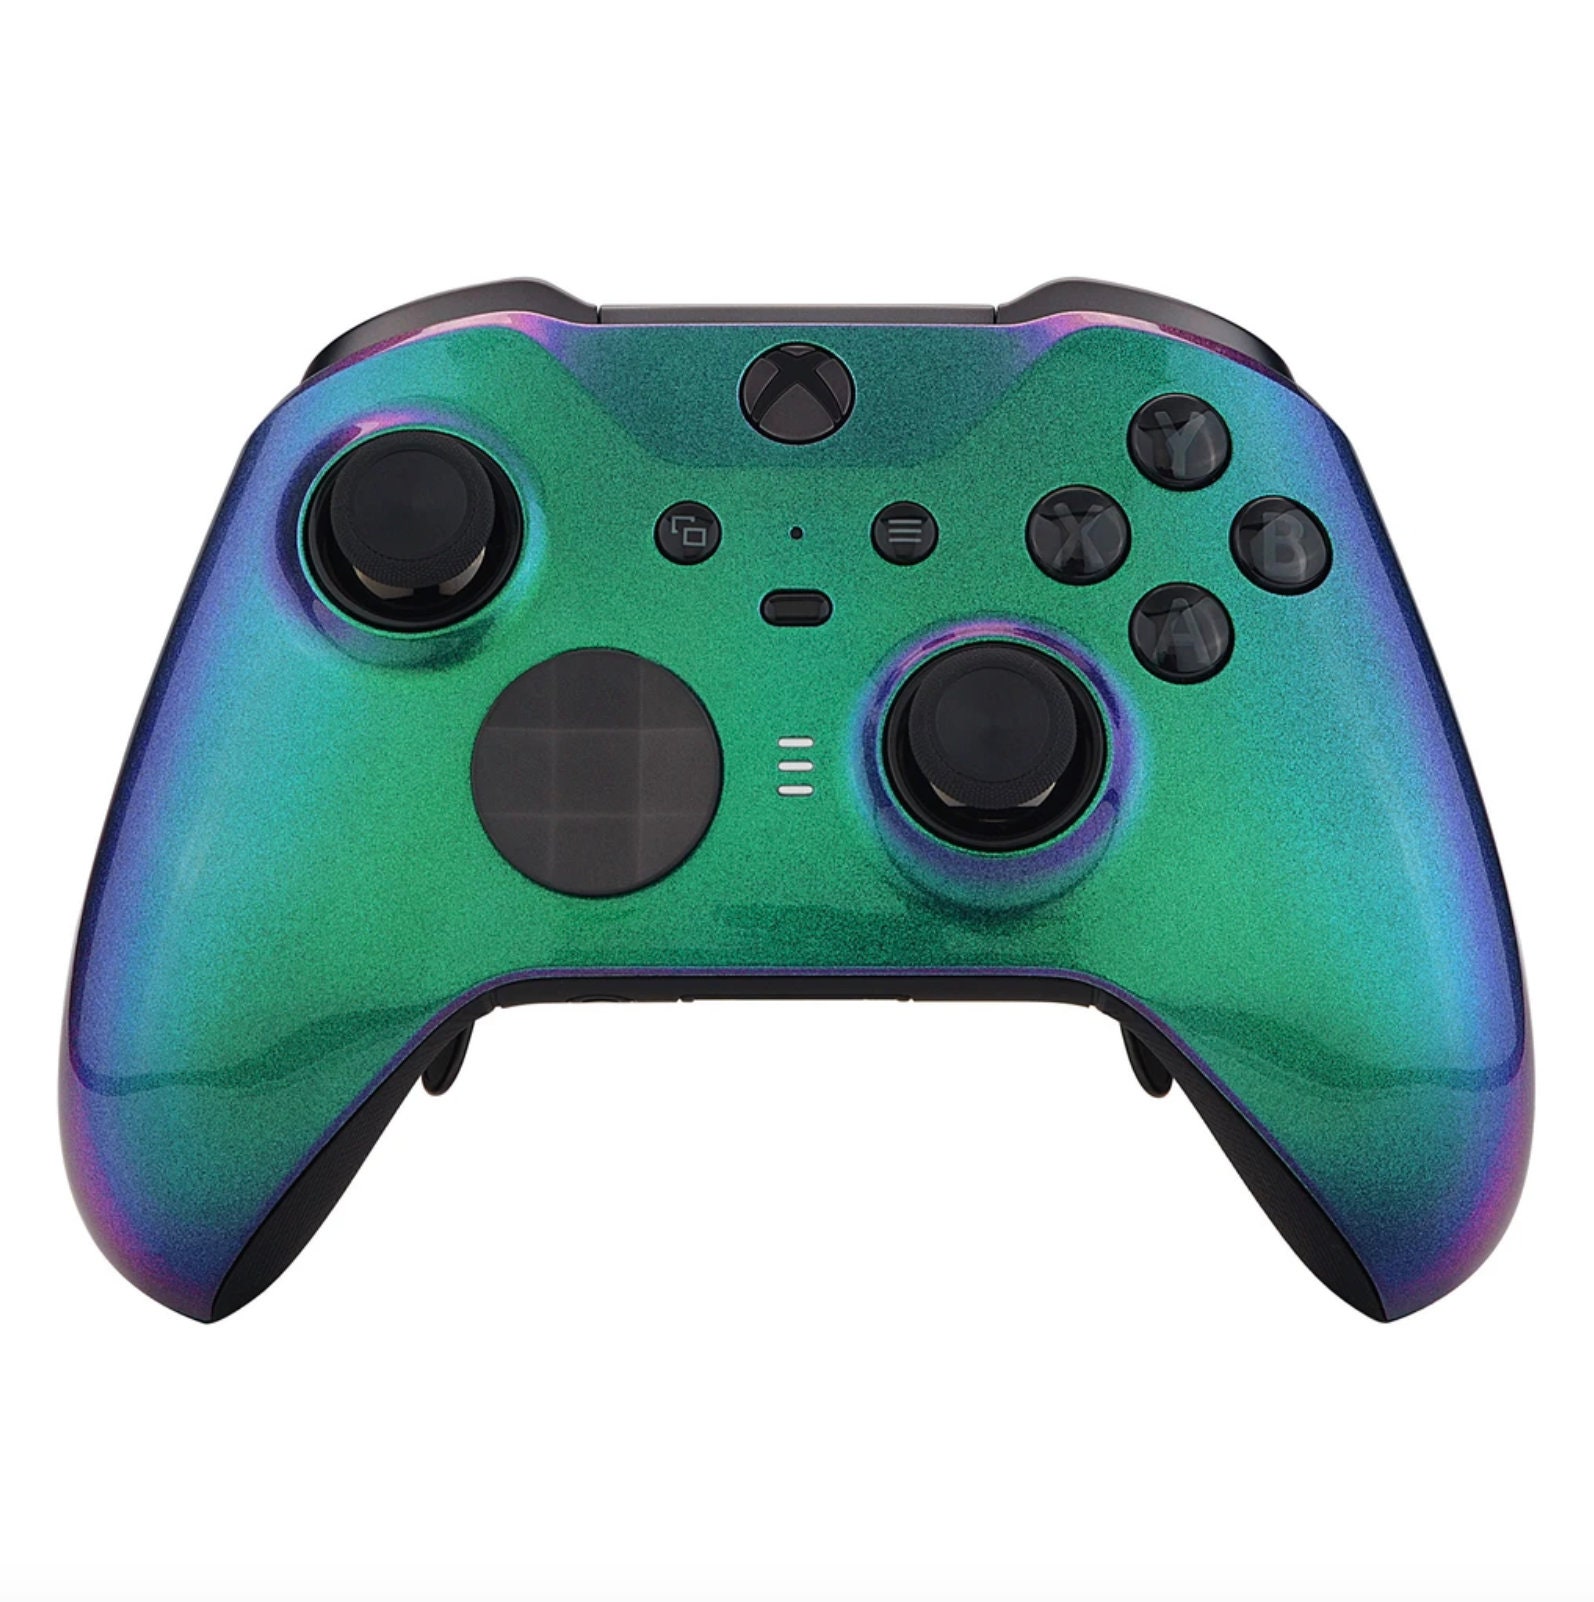  Custom Elite Series 2 Controller Compatible With Xbox One, Xbox  Series S, and Xbox Series X (Green) : Videojuegos